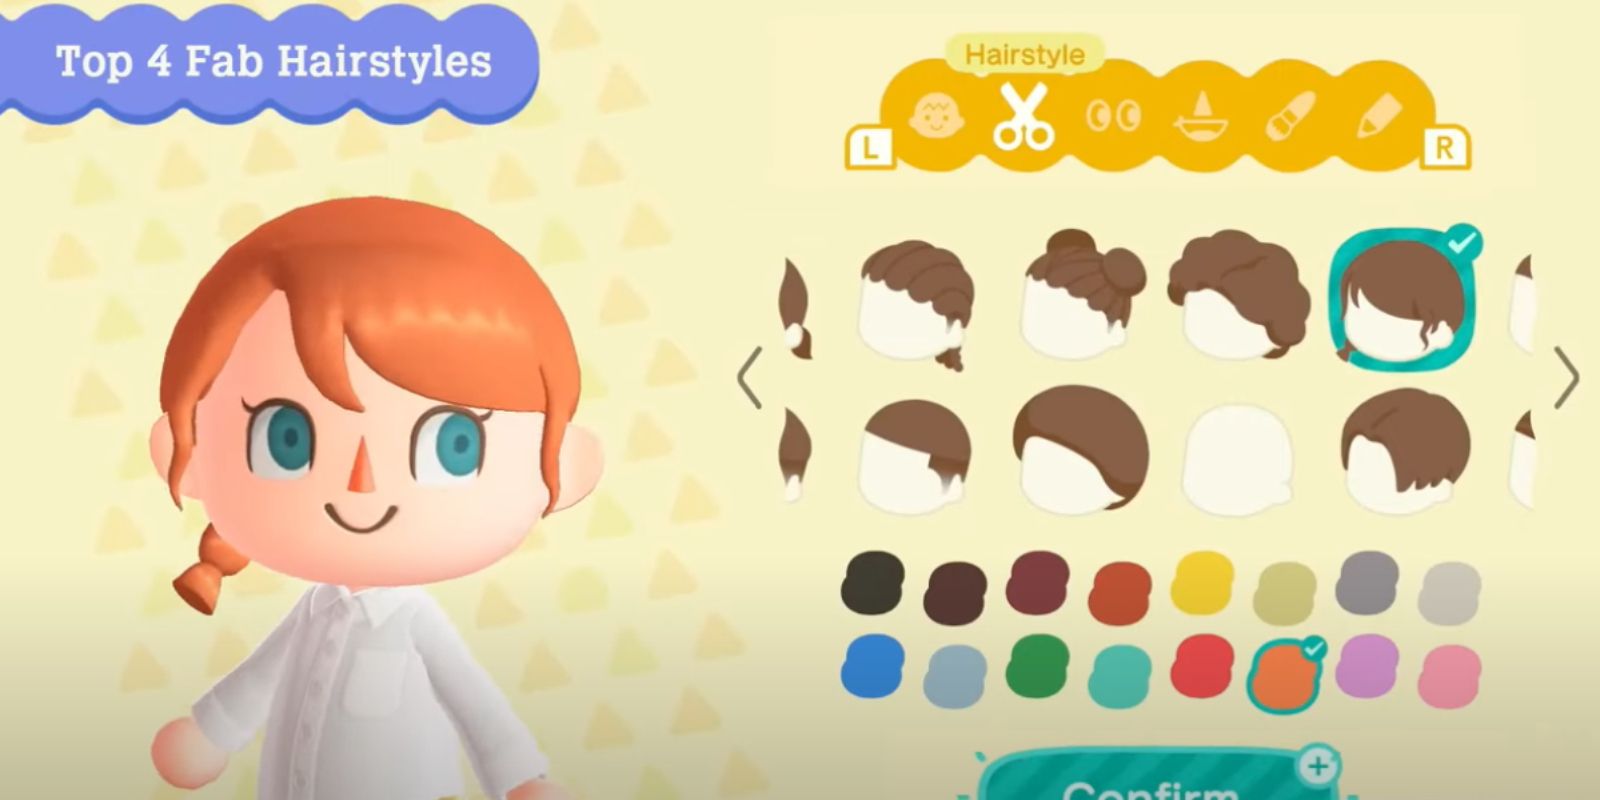 All New Animal Crossing Hairstyles Top Fab Four Hair Pack (4)